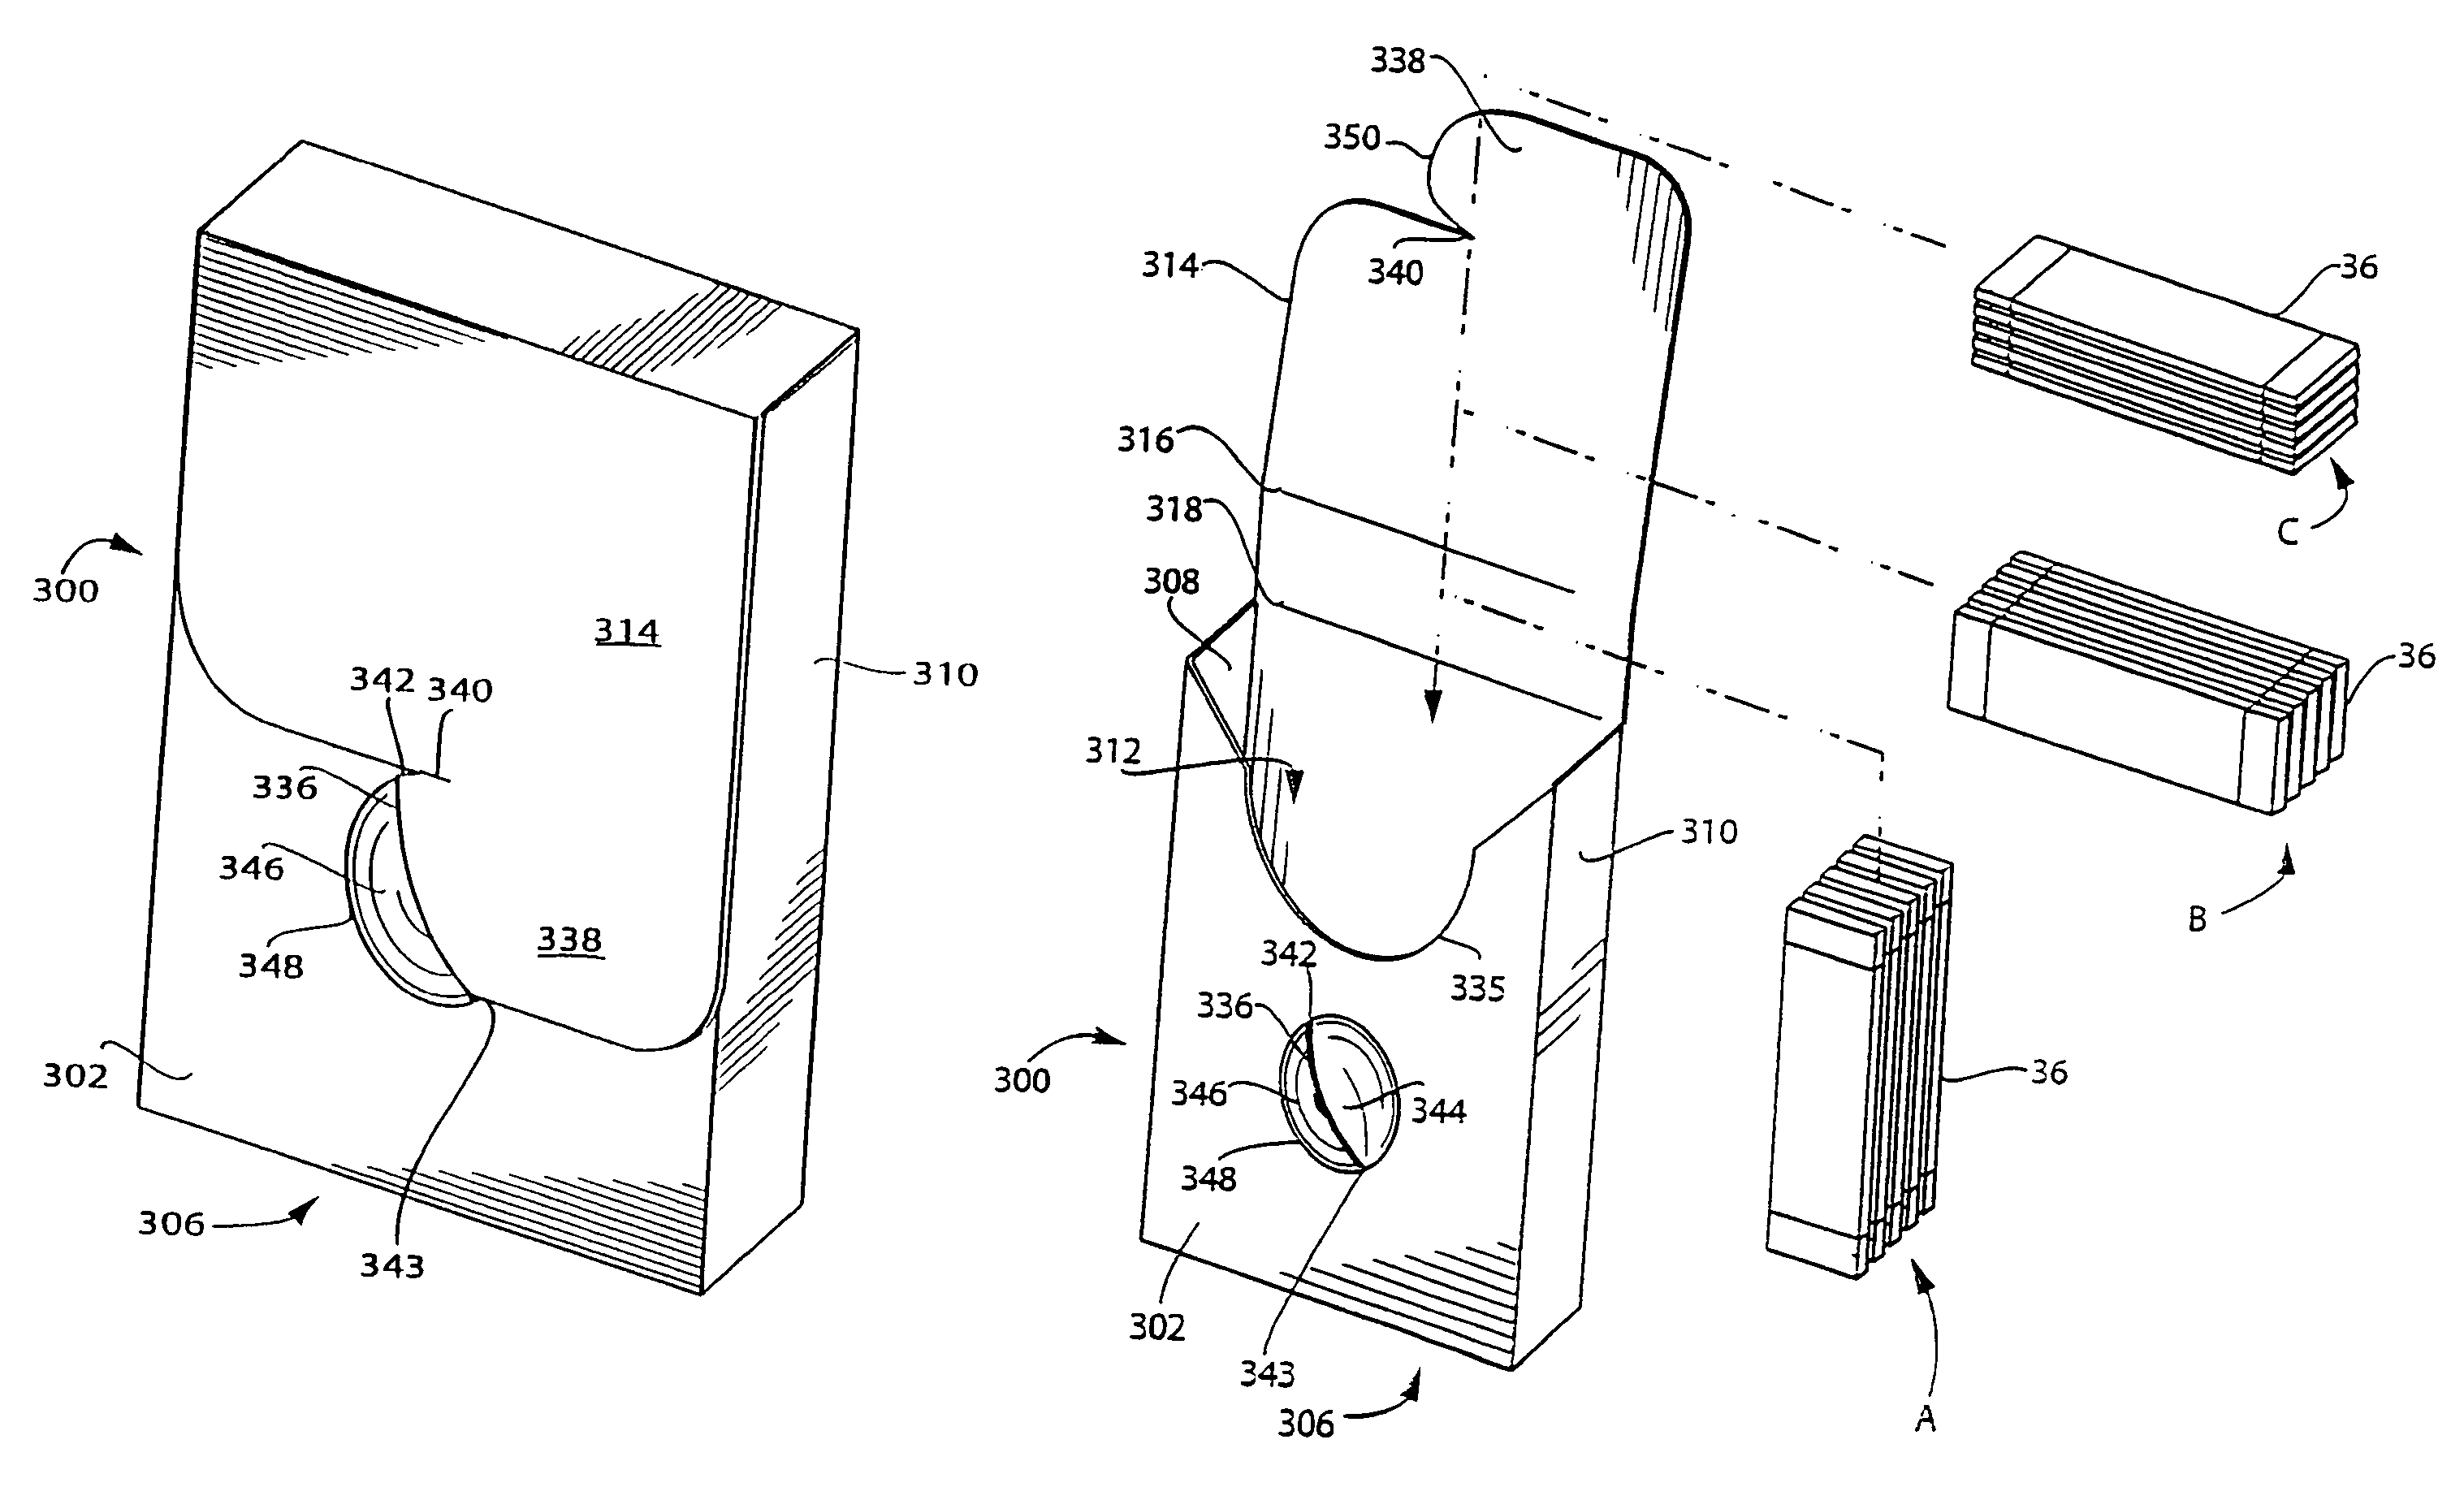 Comestible product dispensers and methods of making and using same